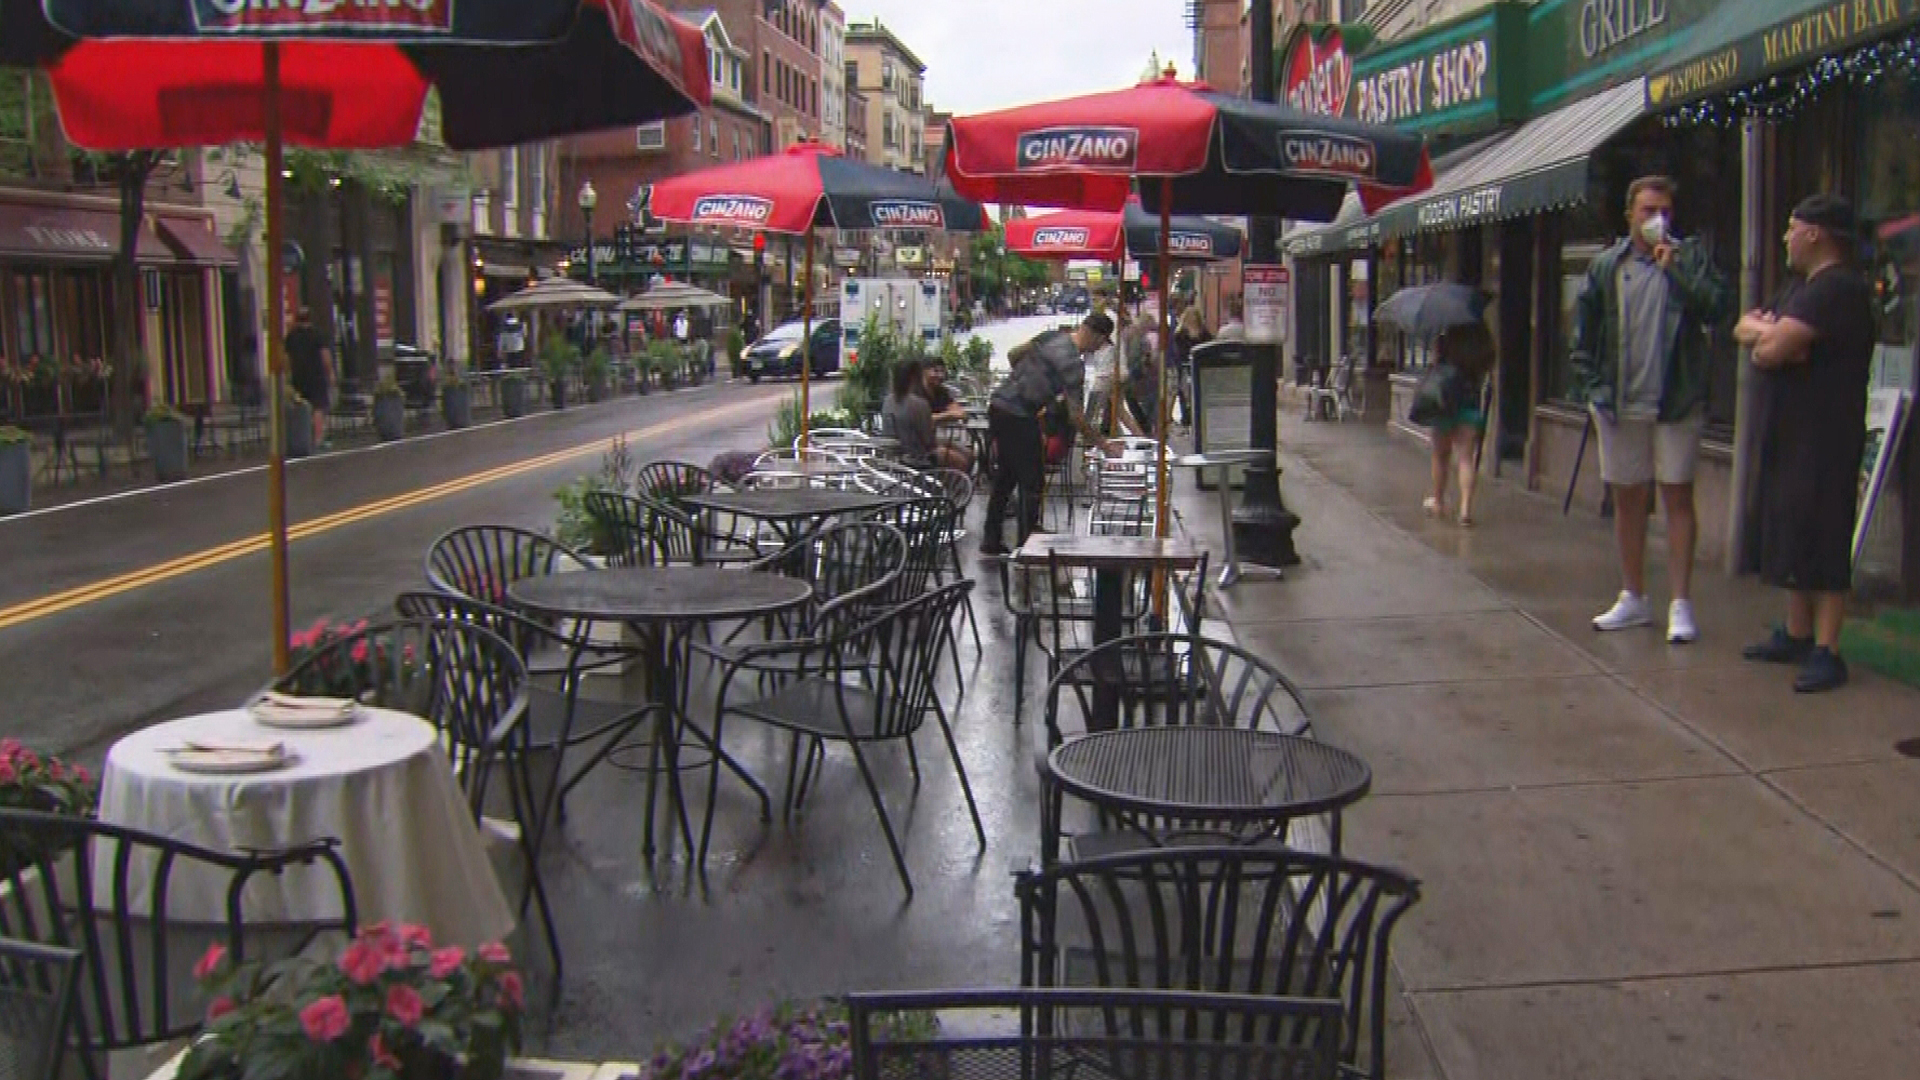 North End Restaurant Owners Plan To Sue Over Outdoor Dining Fees